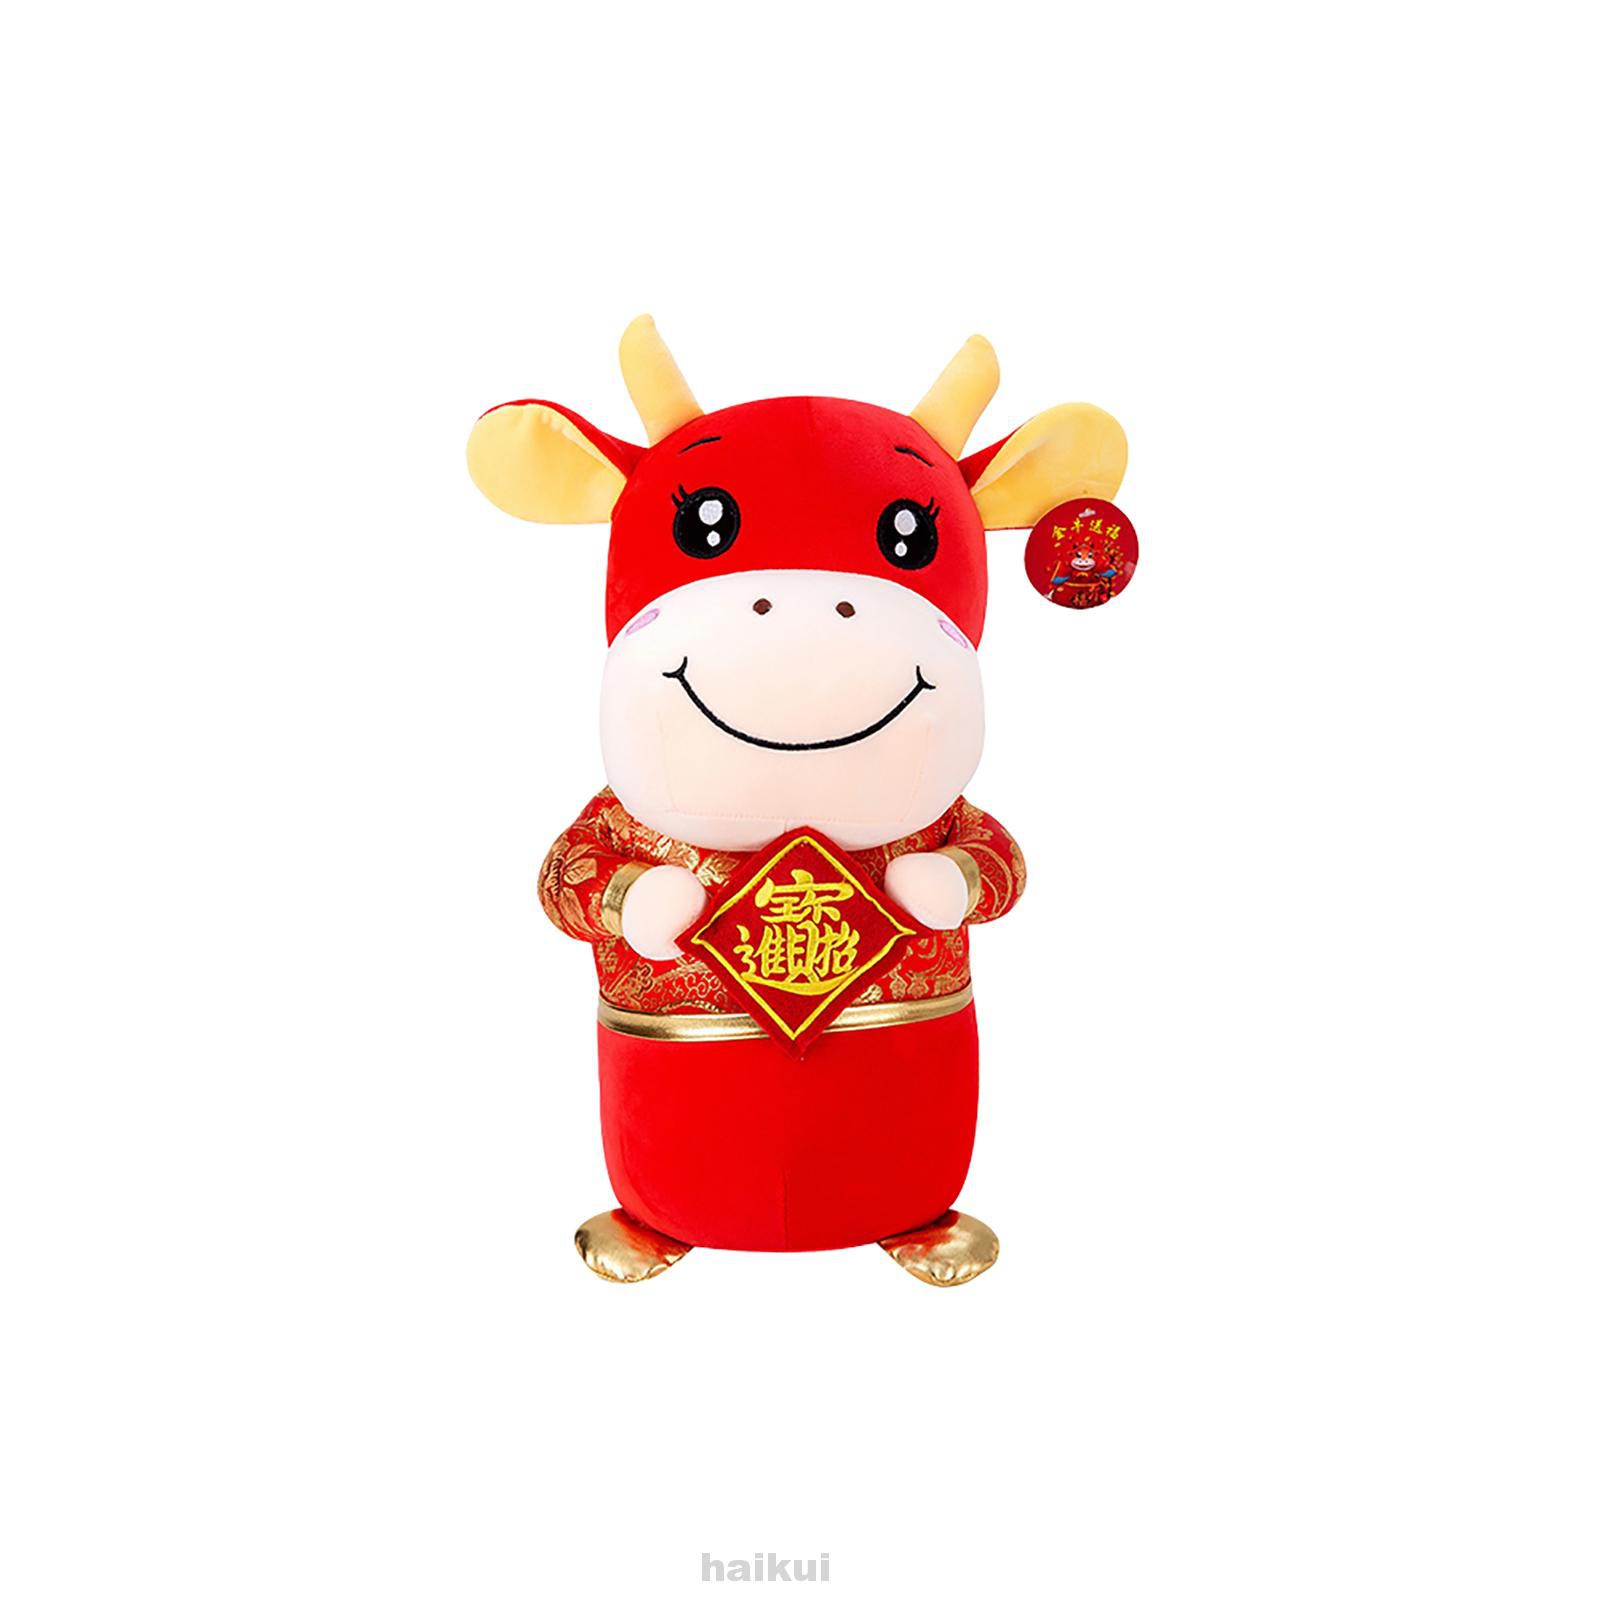 Soft Festival Home Decoration Kids Holiday Stuffed Chinese New Year Cow Plush Toy